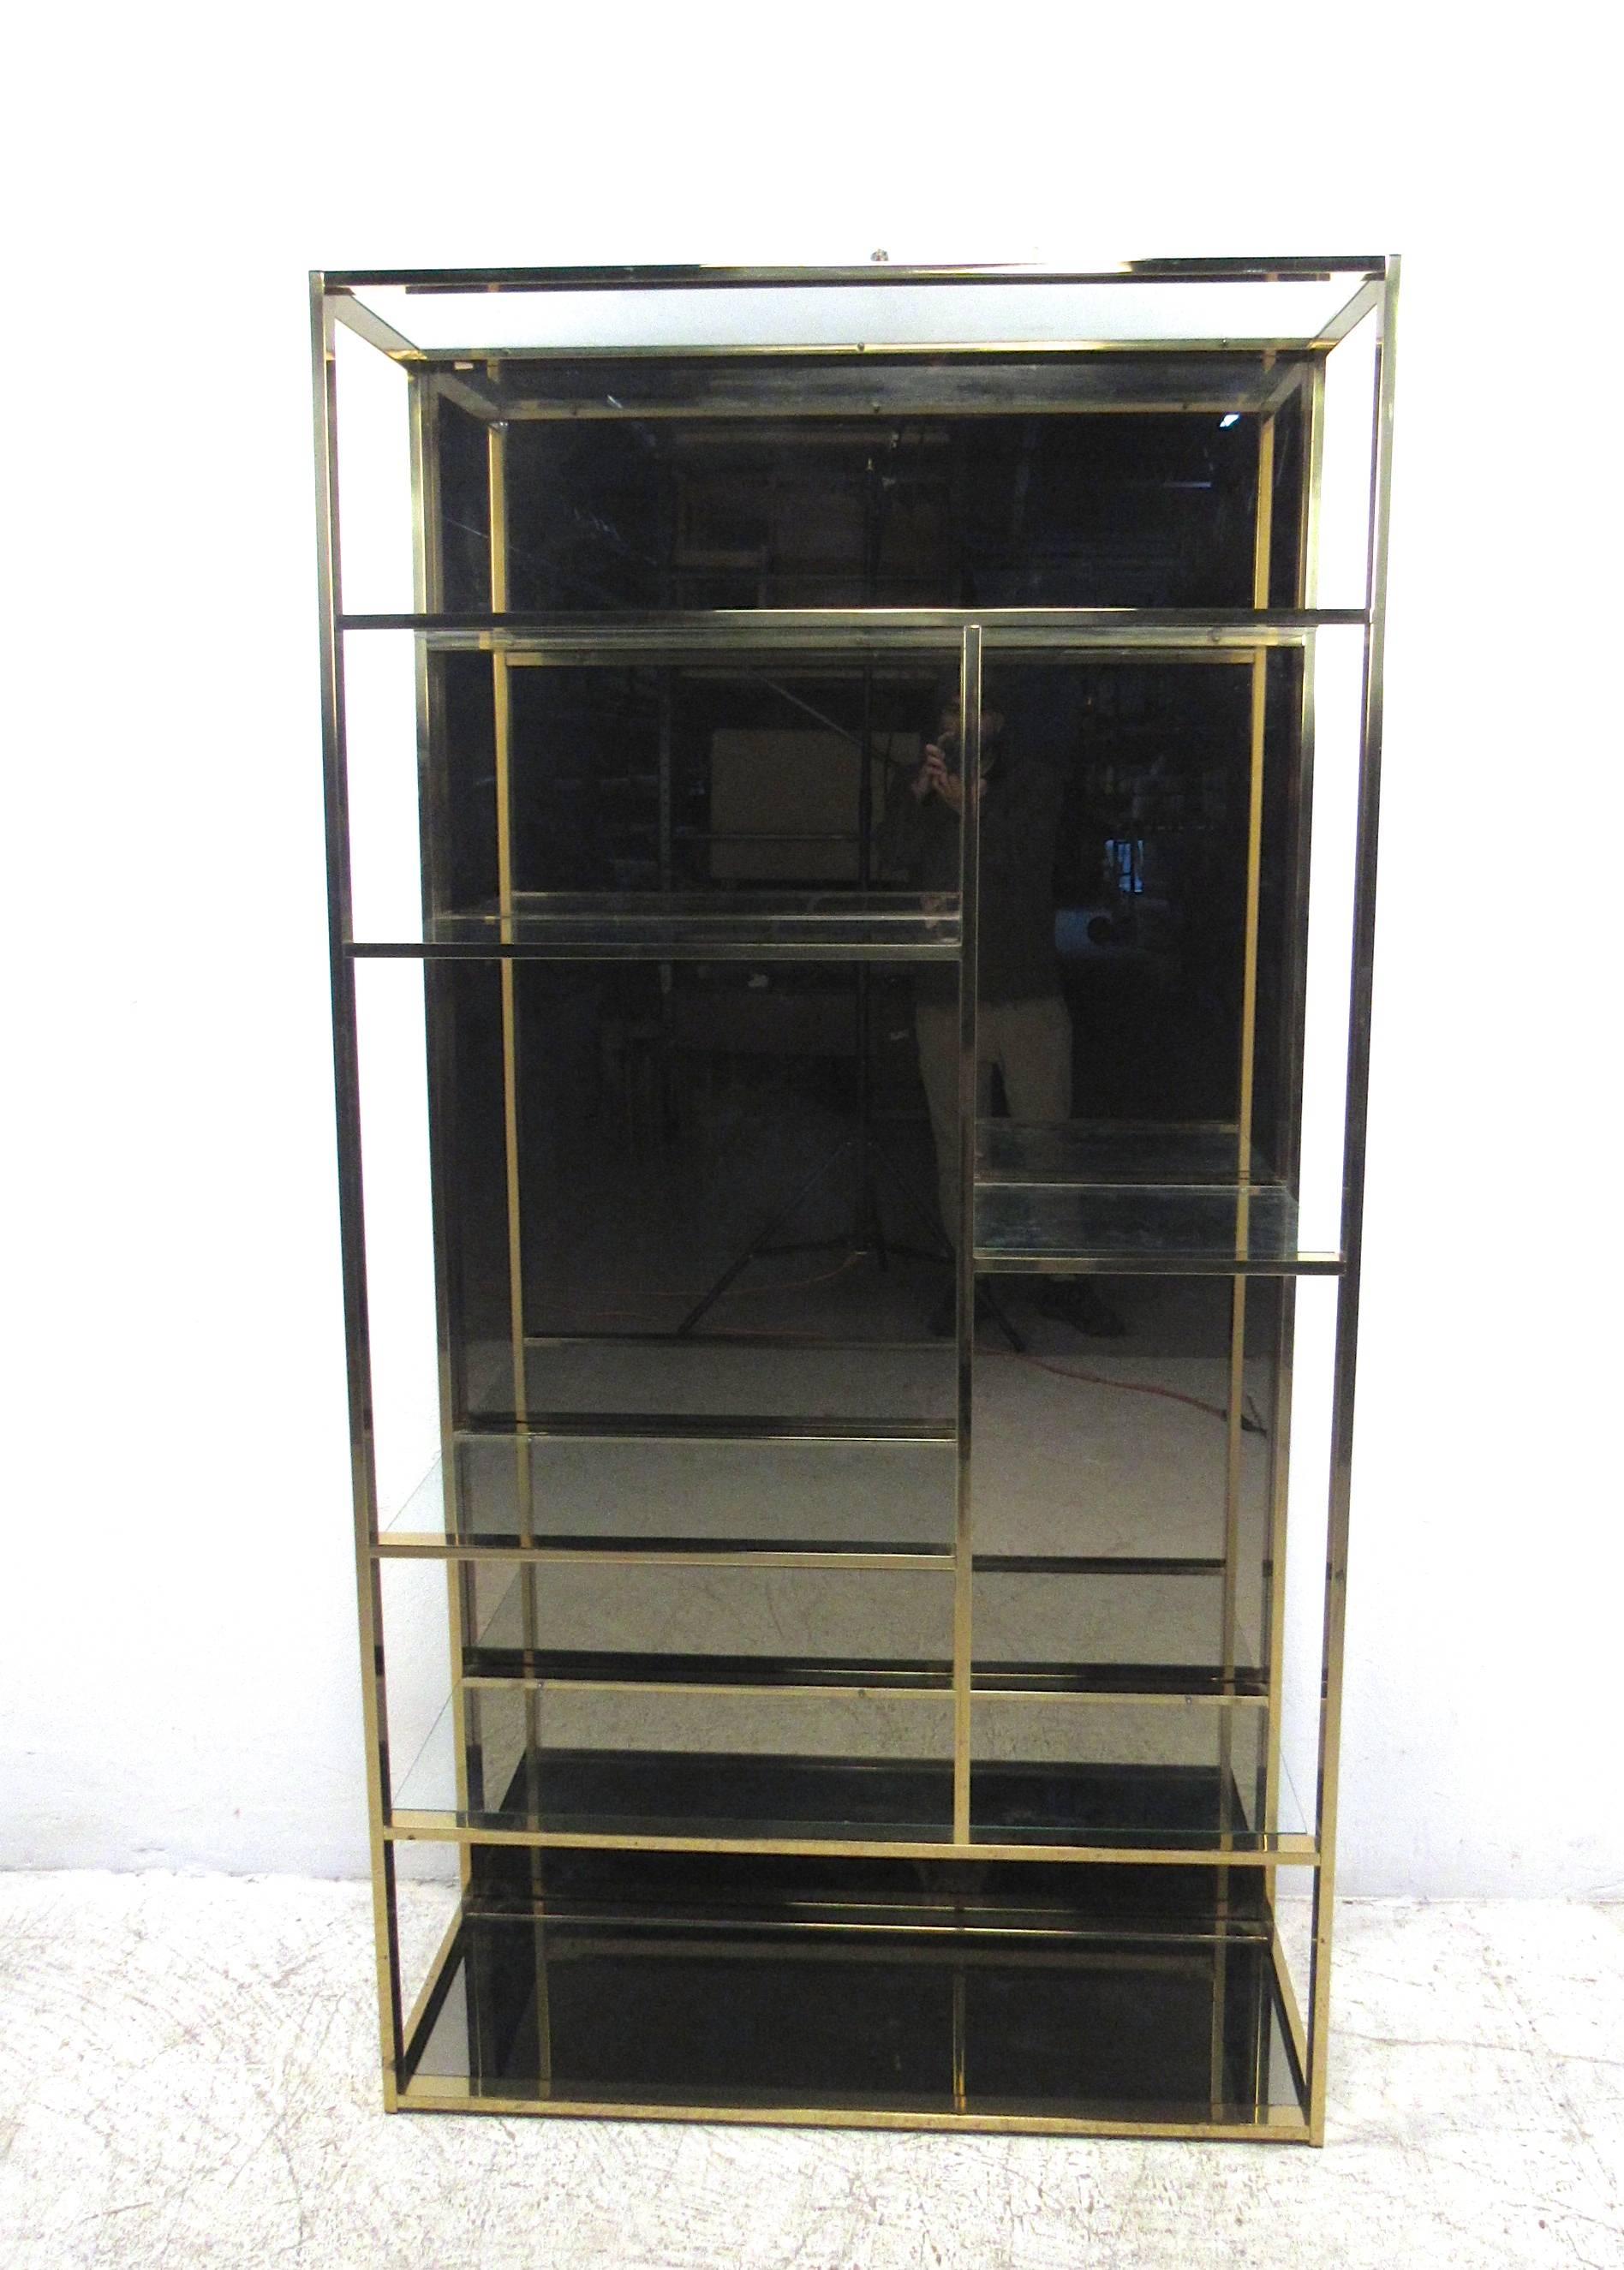 This unique brass finish etagere offers plenty of stylish storage or display space, complete with staggered size shelves for added variety. Unique smoked mirror background and bottom shelf add a nice vintage touch to the piece. Please confirm item